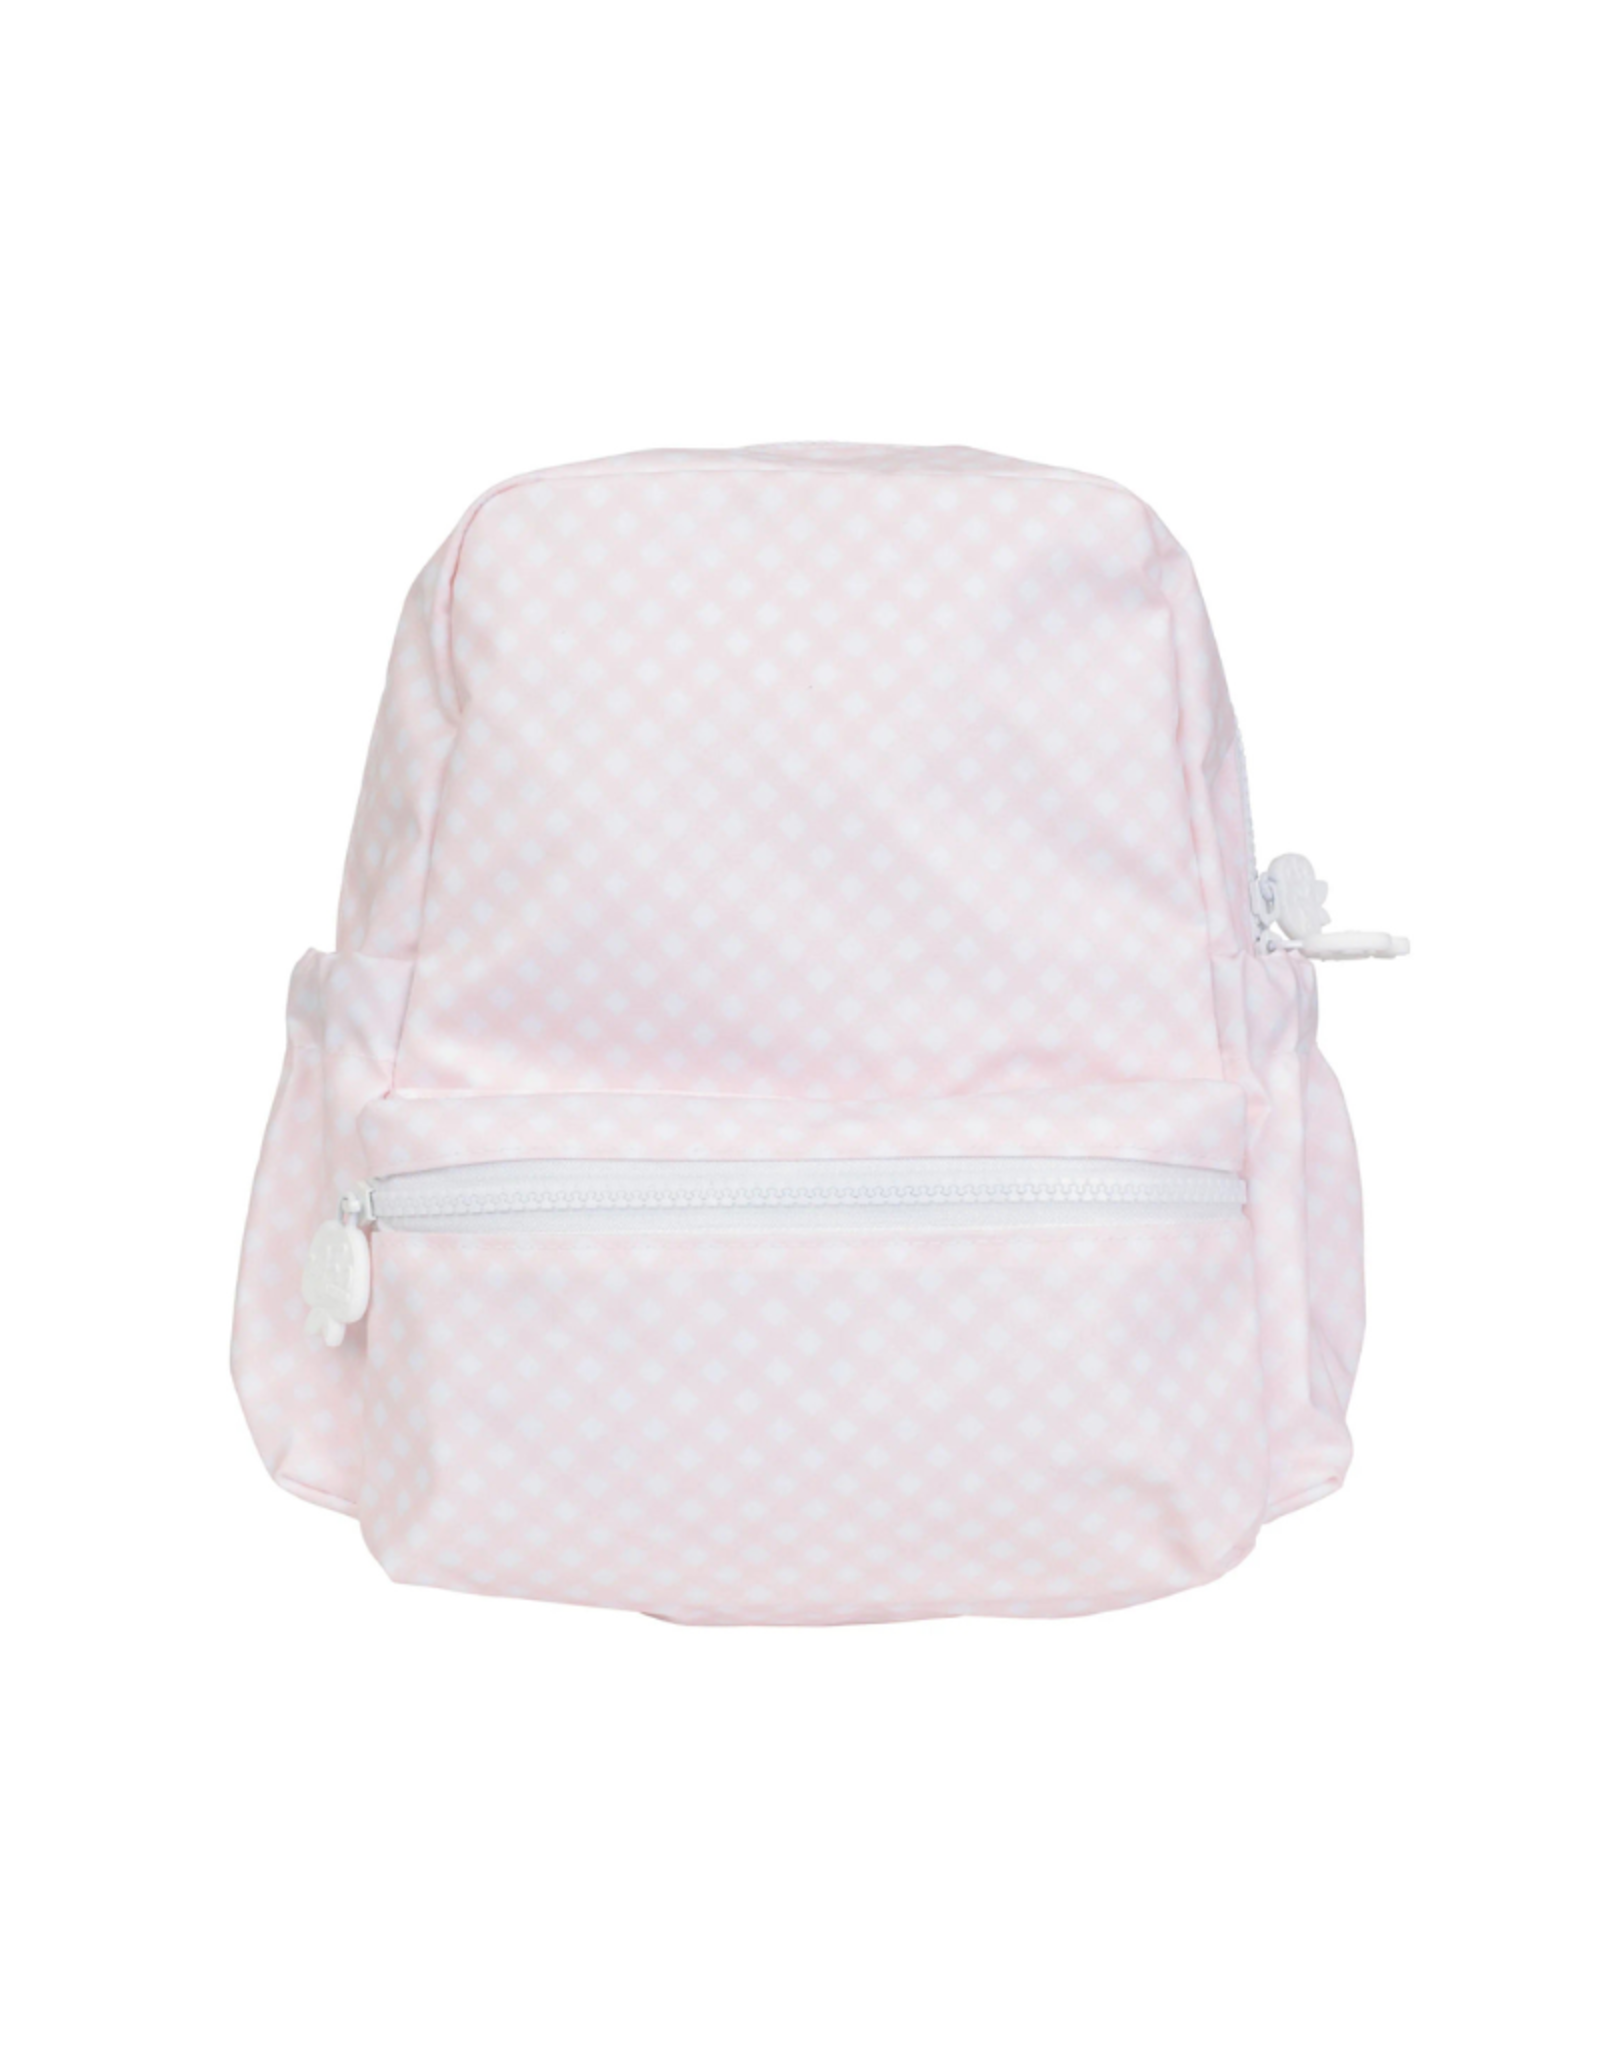 Apple of My Isla The Backpack Small, Pink Gingham